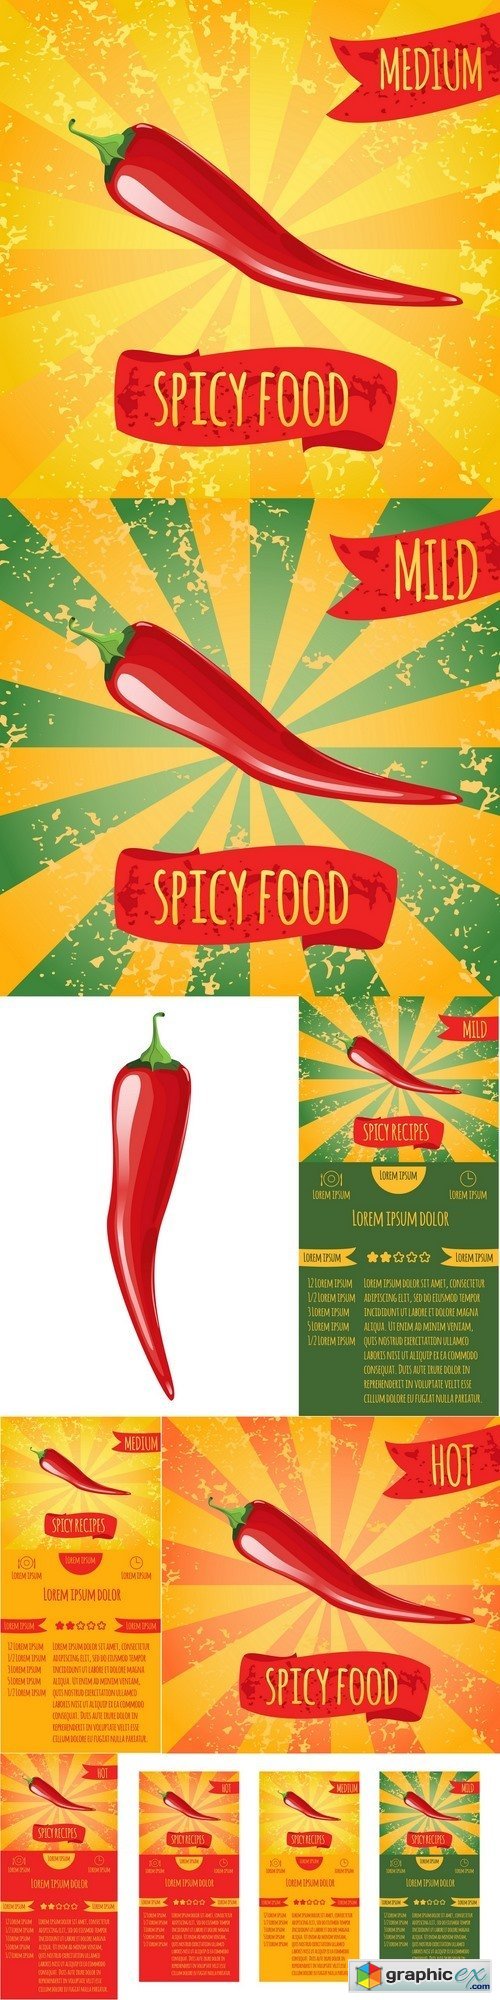 Three leaflets design recipes spicy dishes